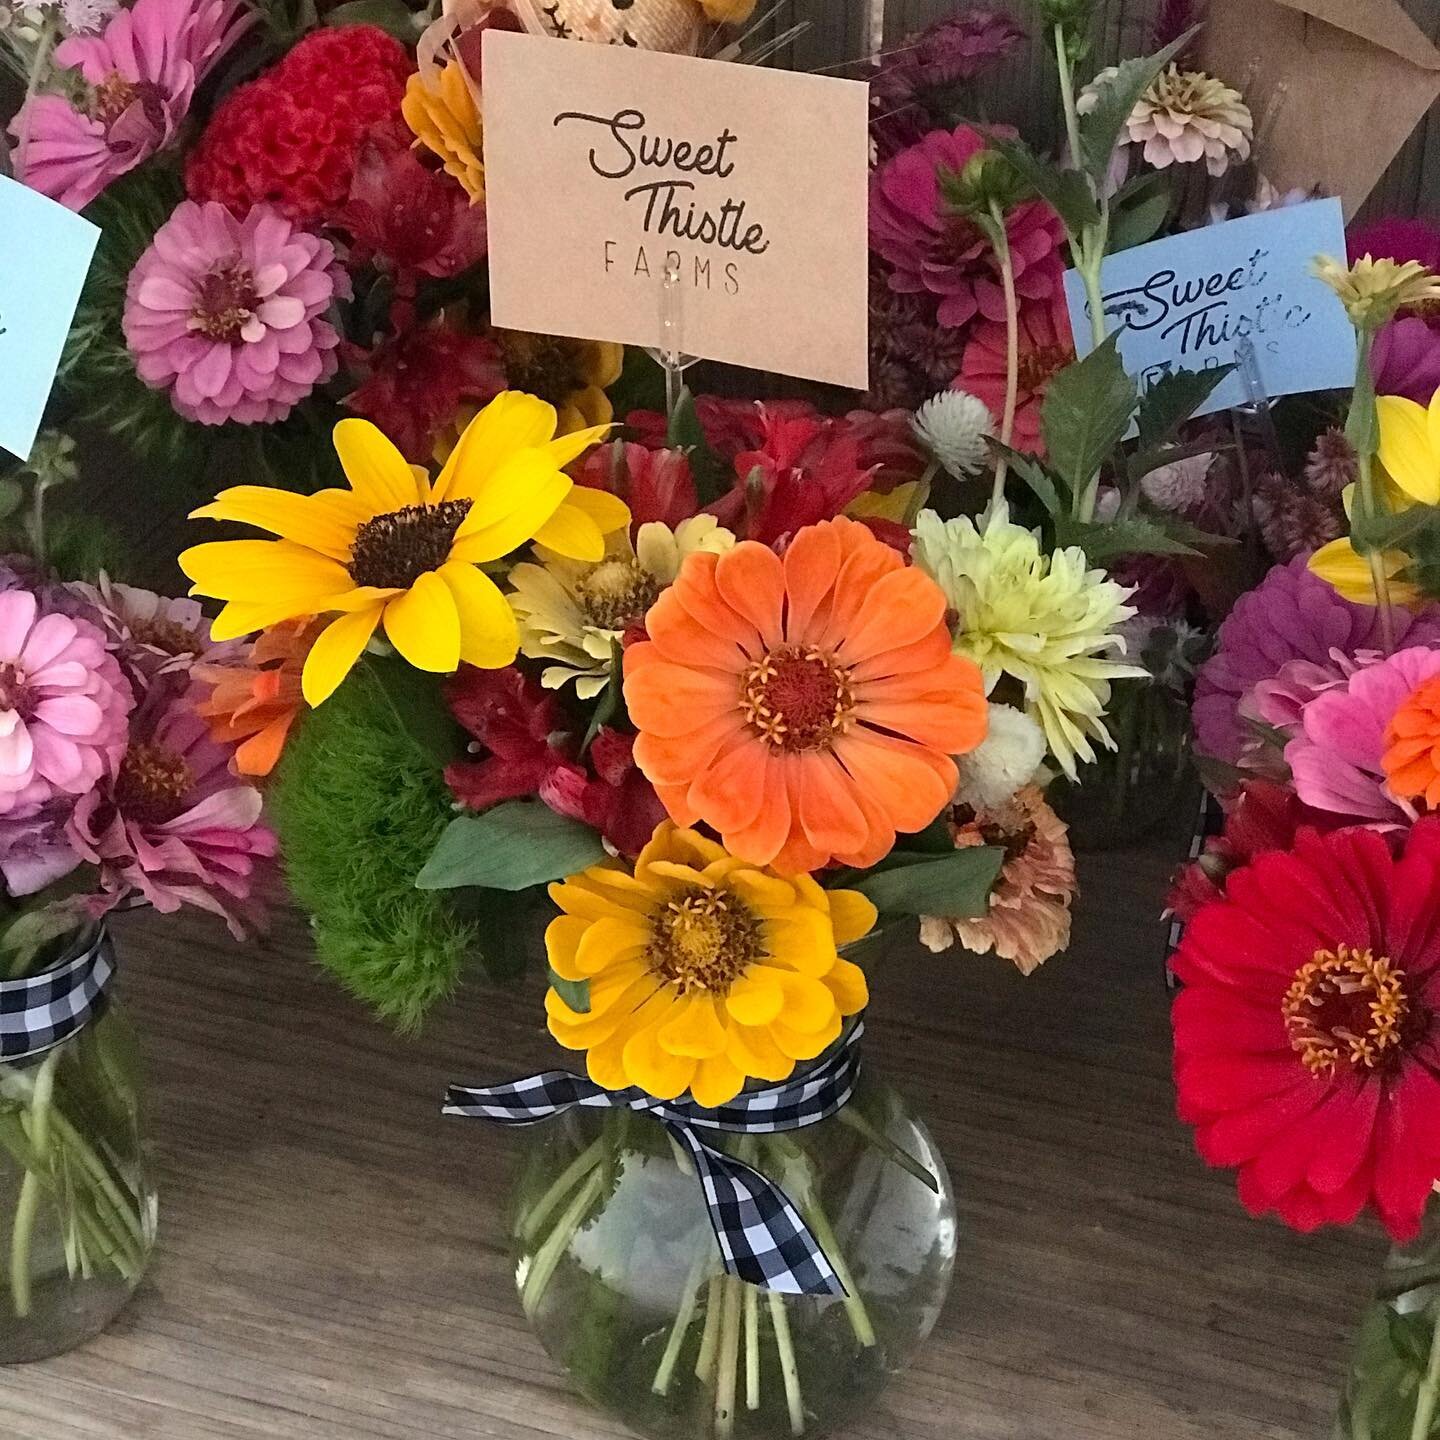 Farm Stand has some bouquets ready! Tuesday and Thursday we have flowers available at our farm stand. #flowers #farmstand #cagrown #sweetthistlefarms #cutflowers #flowerfarminglife #flowerfarmer #growfloret #seeds #masonjar #clovis #fresno #clovisflo